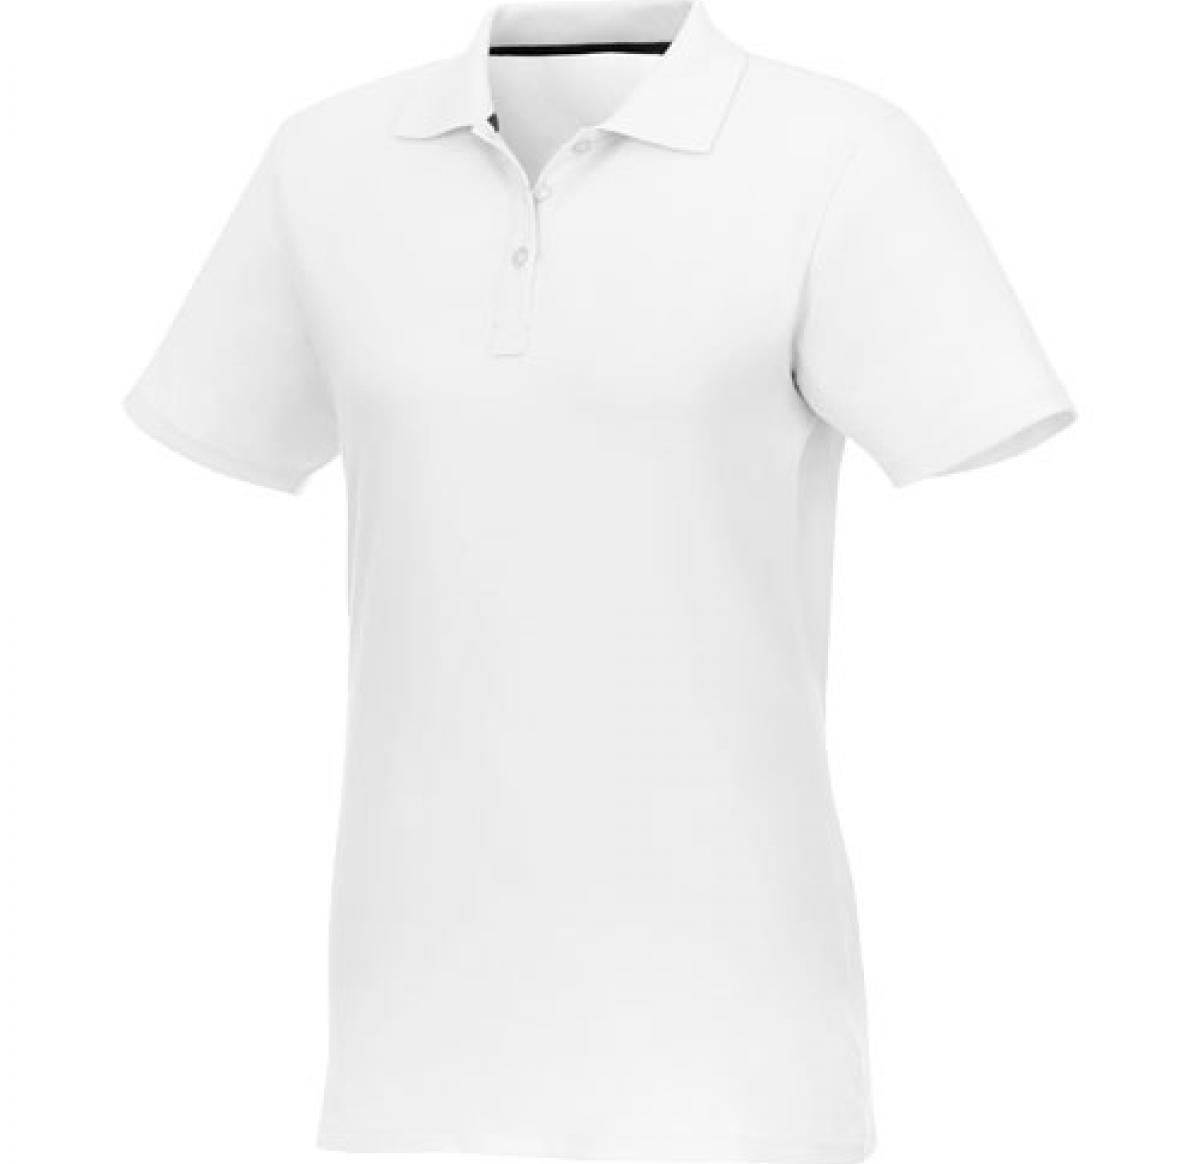 Branded Elevate Helios Short Sleeve Women's Polo Shirts